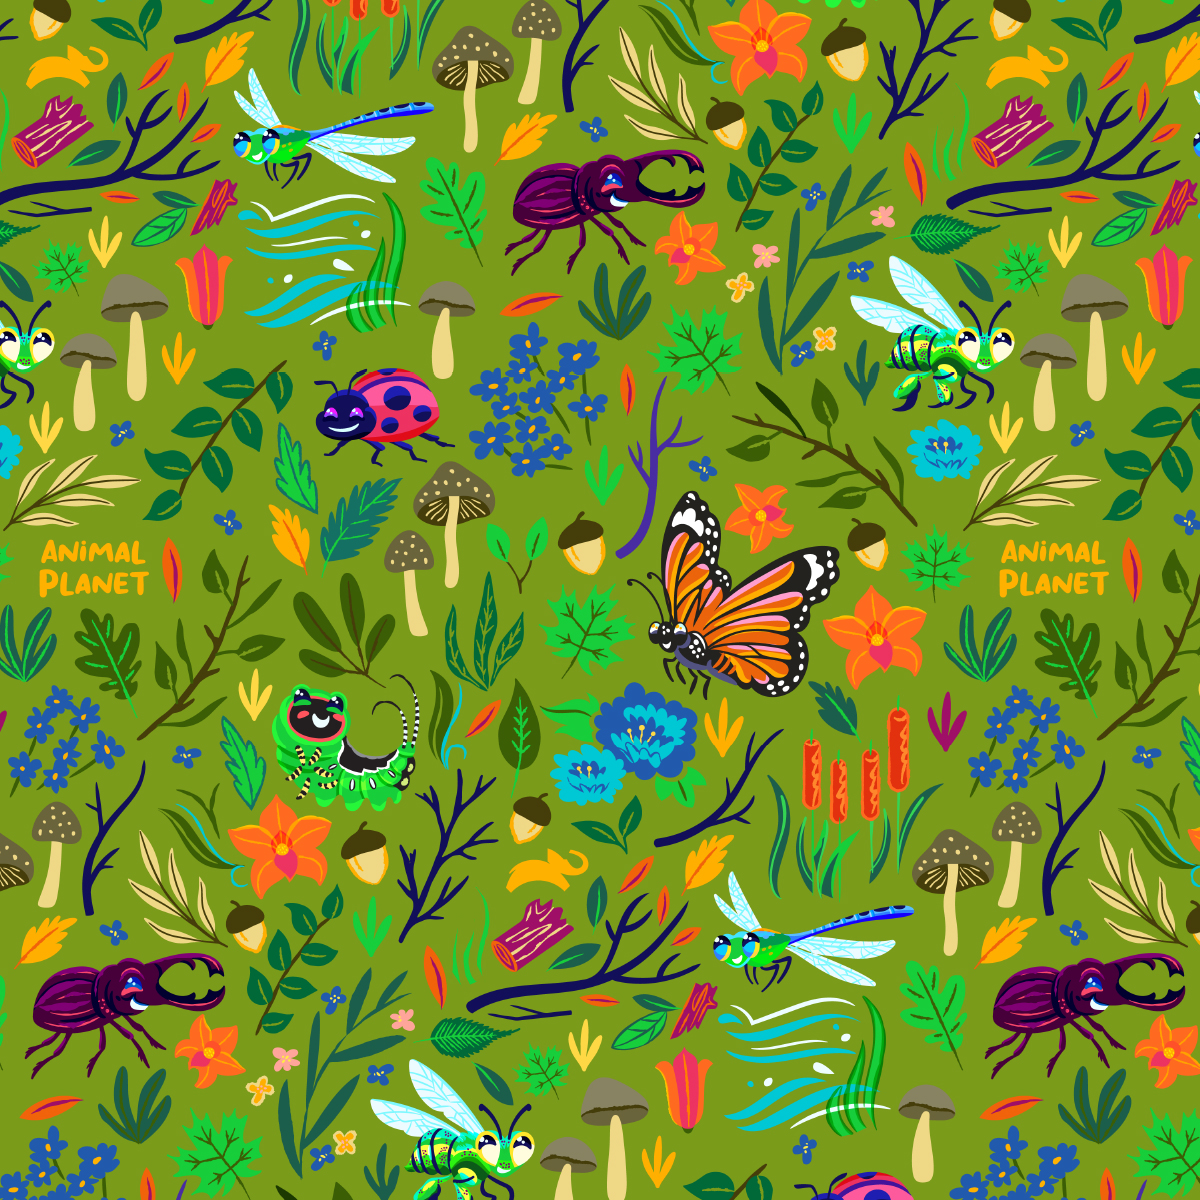 Another pattern featuring character art of the bugs and habitat elements over lush green.